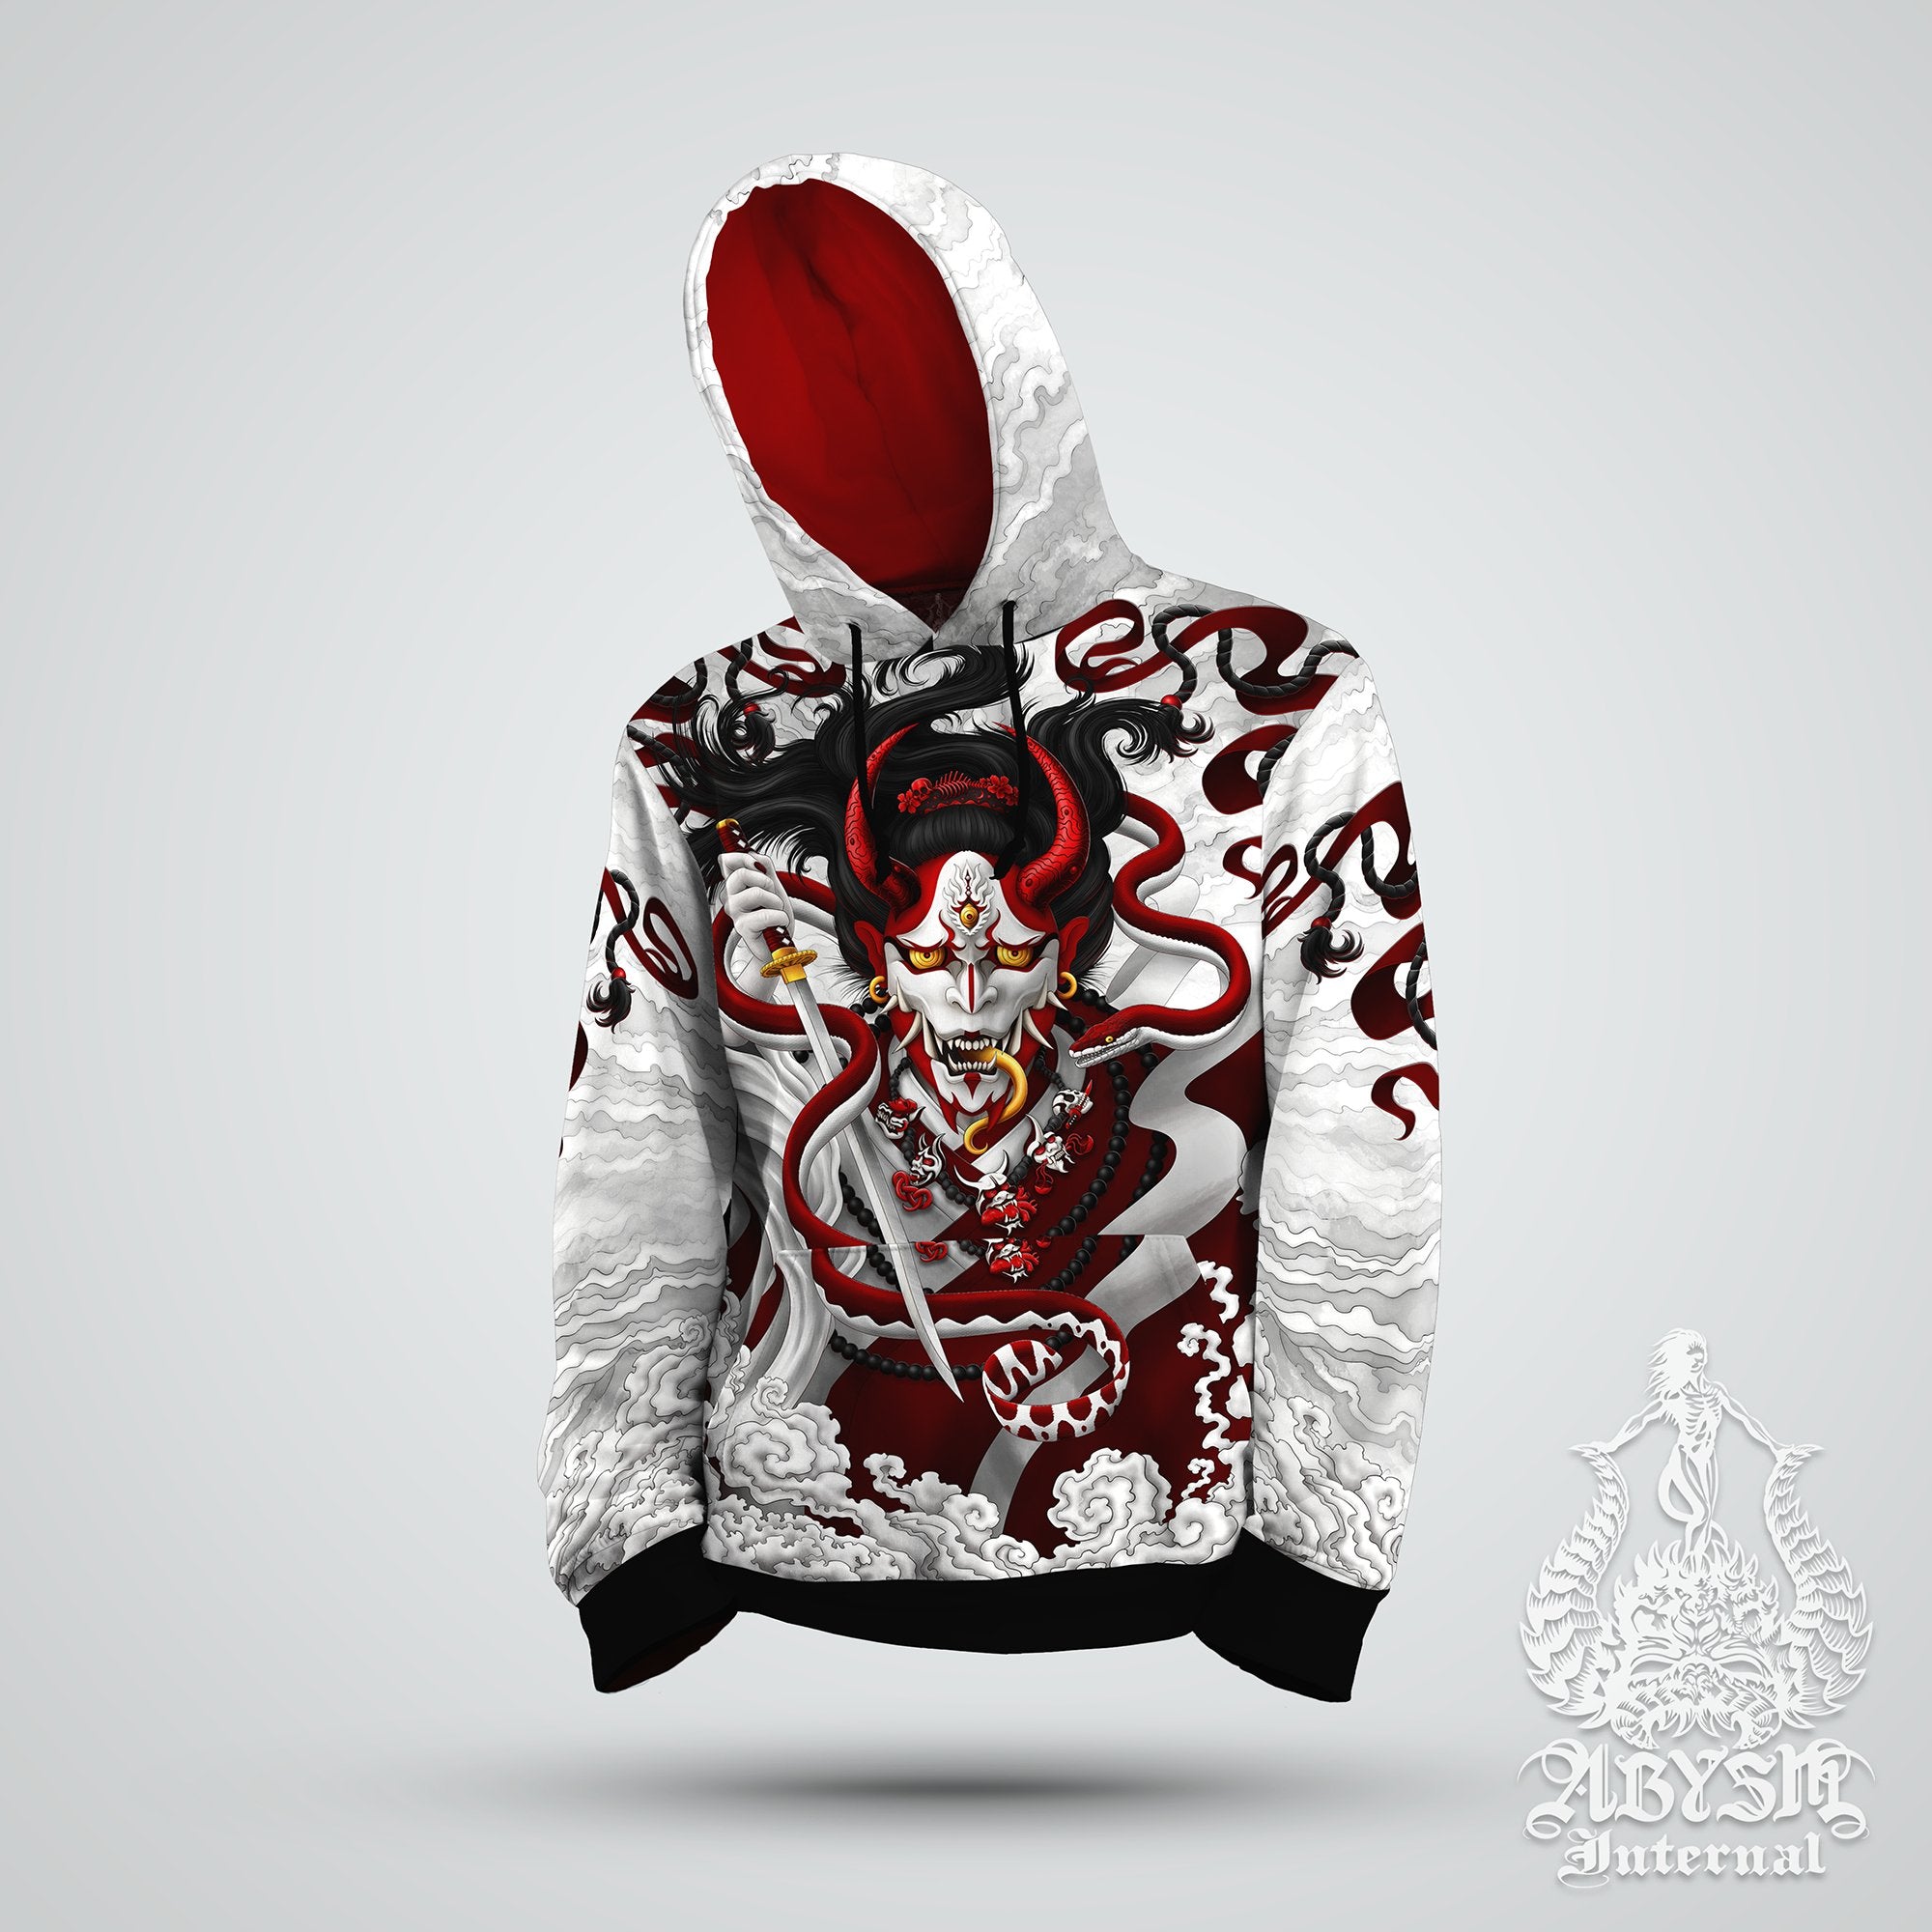 Parkour Hoodie, Japanese Demon Sweater, Manga and Anime Streetwear, White Goth Red Street Outfit, Hannya Pullover, Alternative Clothing, Unisex - Oni and Snake - Abysm Internal